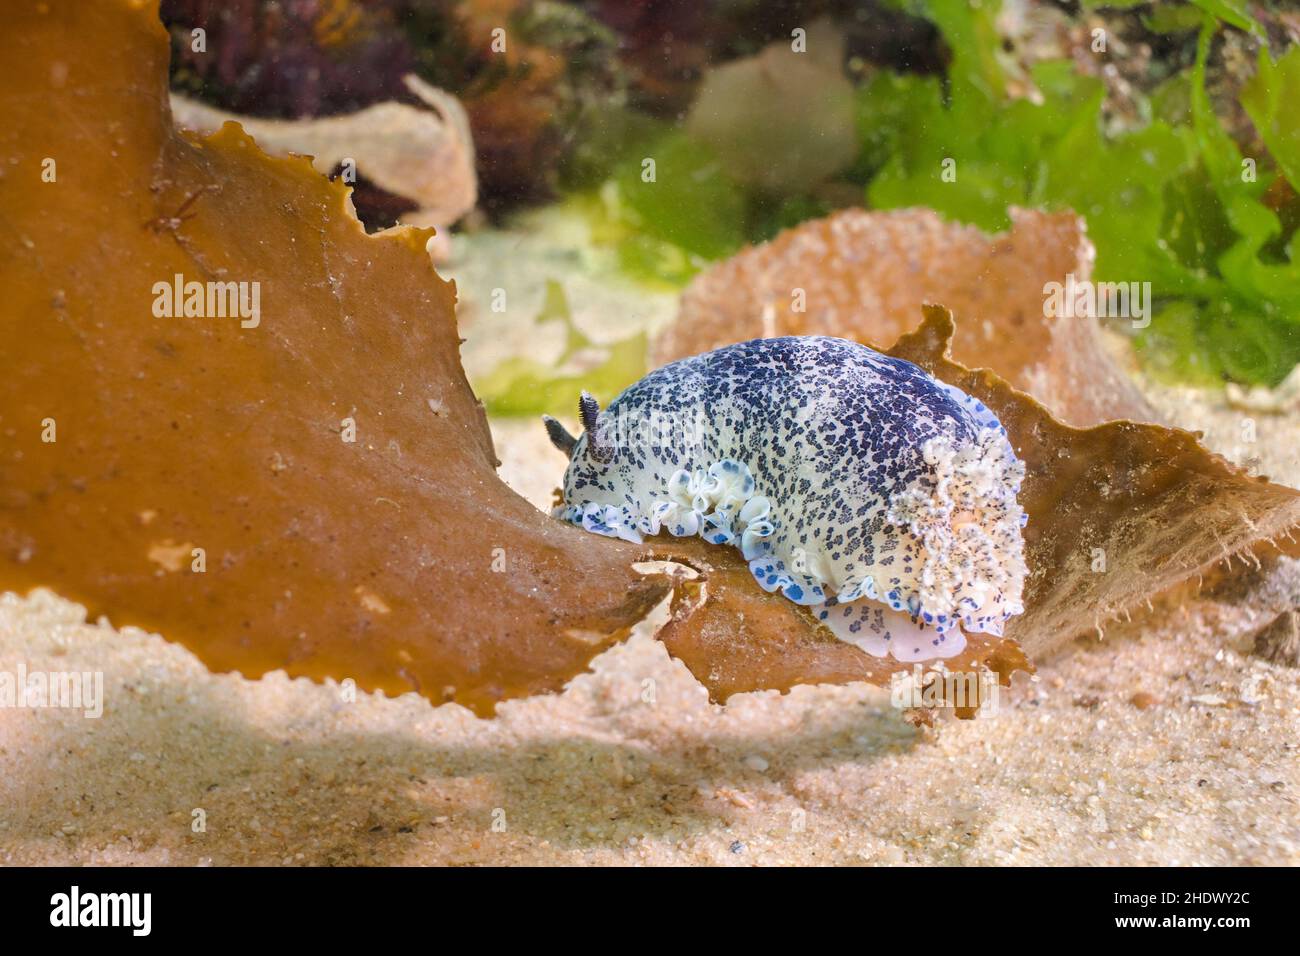 Blue-speckled nudibranch from behind (Dendrodoris caesia) on a piece of kelp floating on the ocean floor. White body covered with blue speckles. Stock Photo